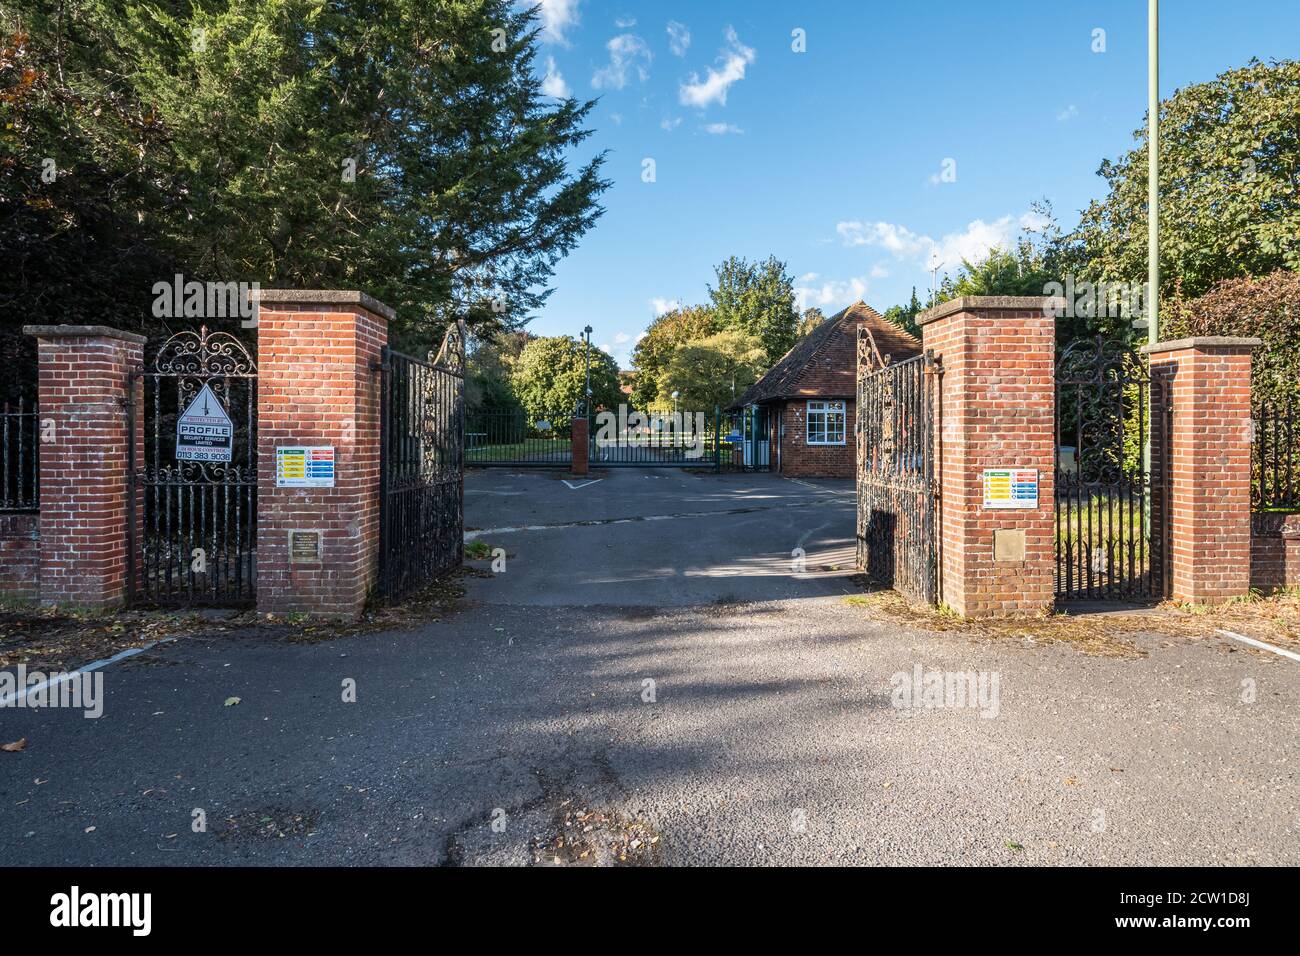 Institute for Animal Health in the Berkshire village of Compton, UK. The laboratory has now closed and the site is likely to be developed for houses. Stock Photo